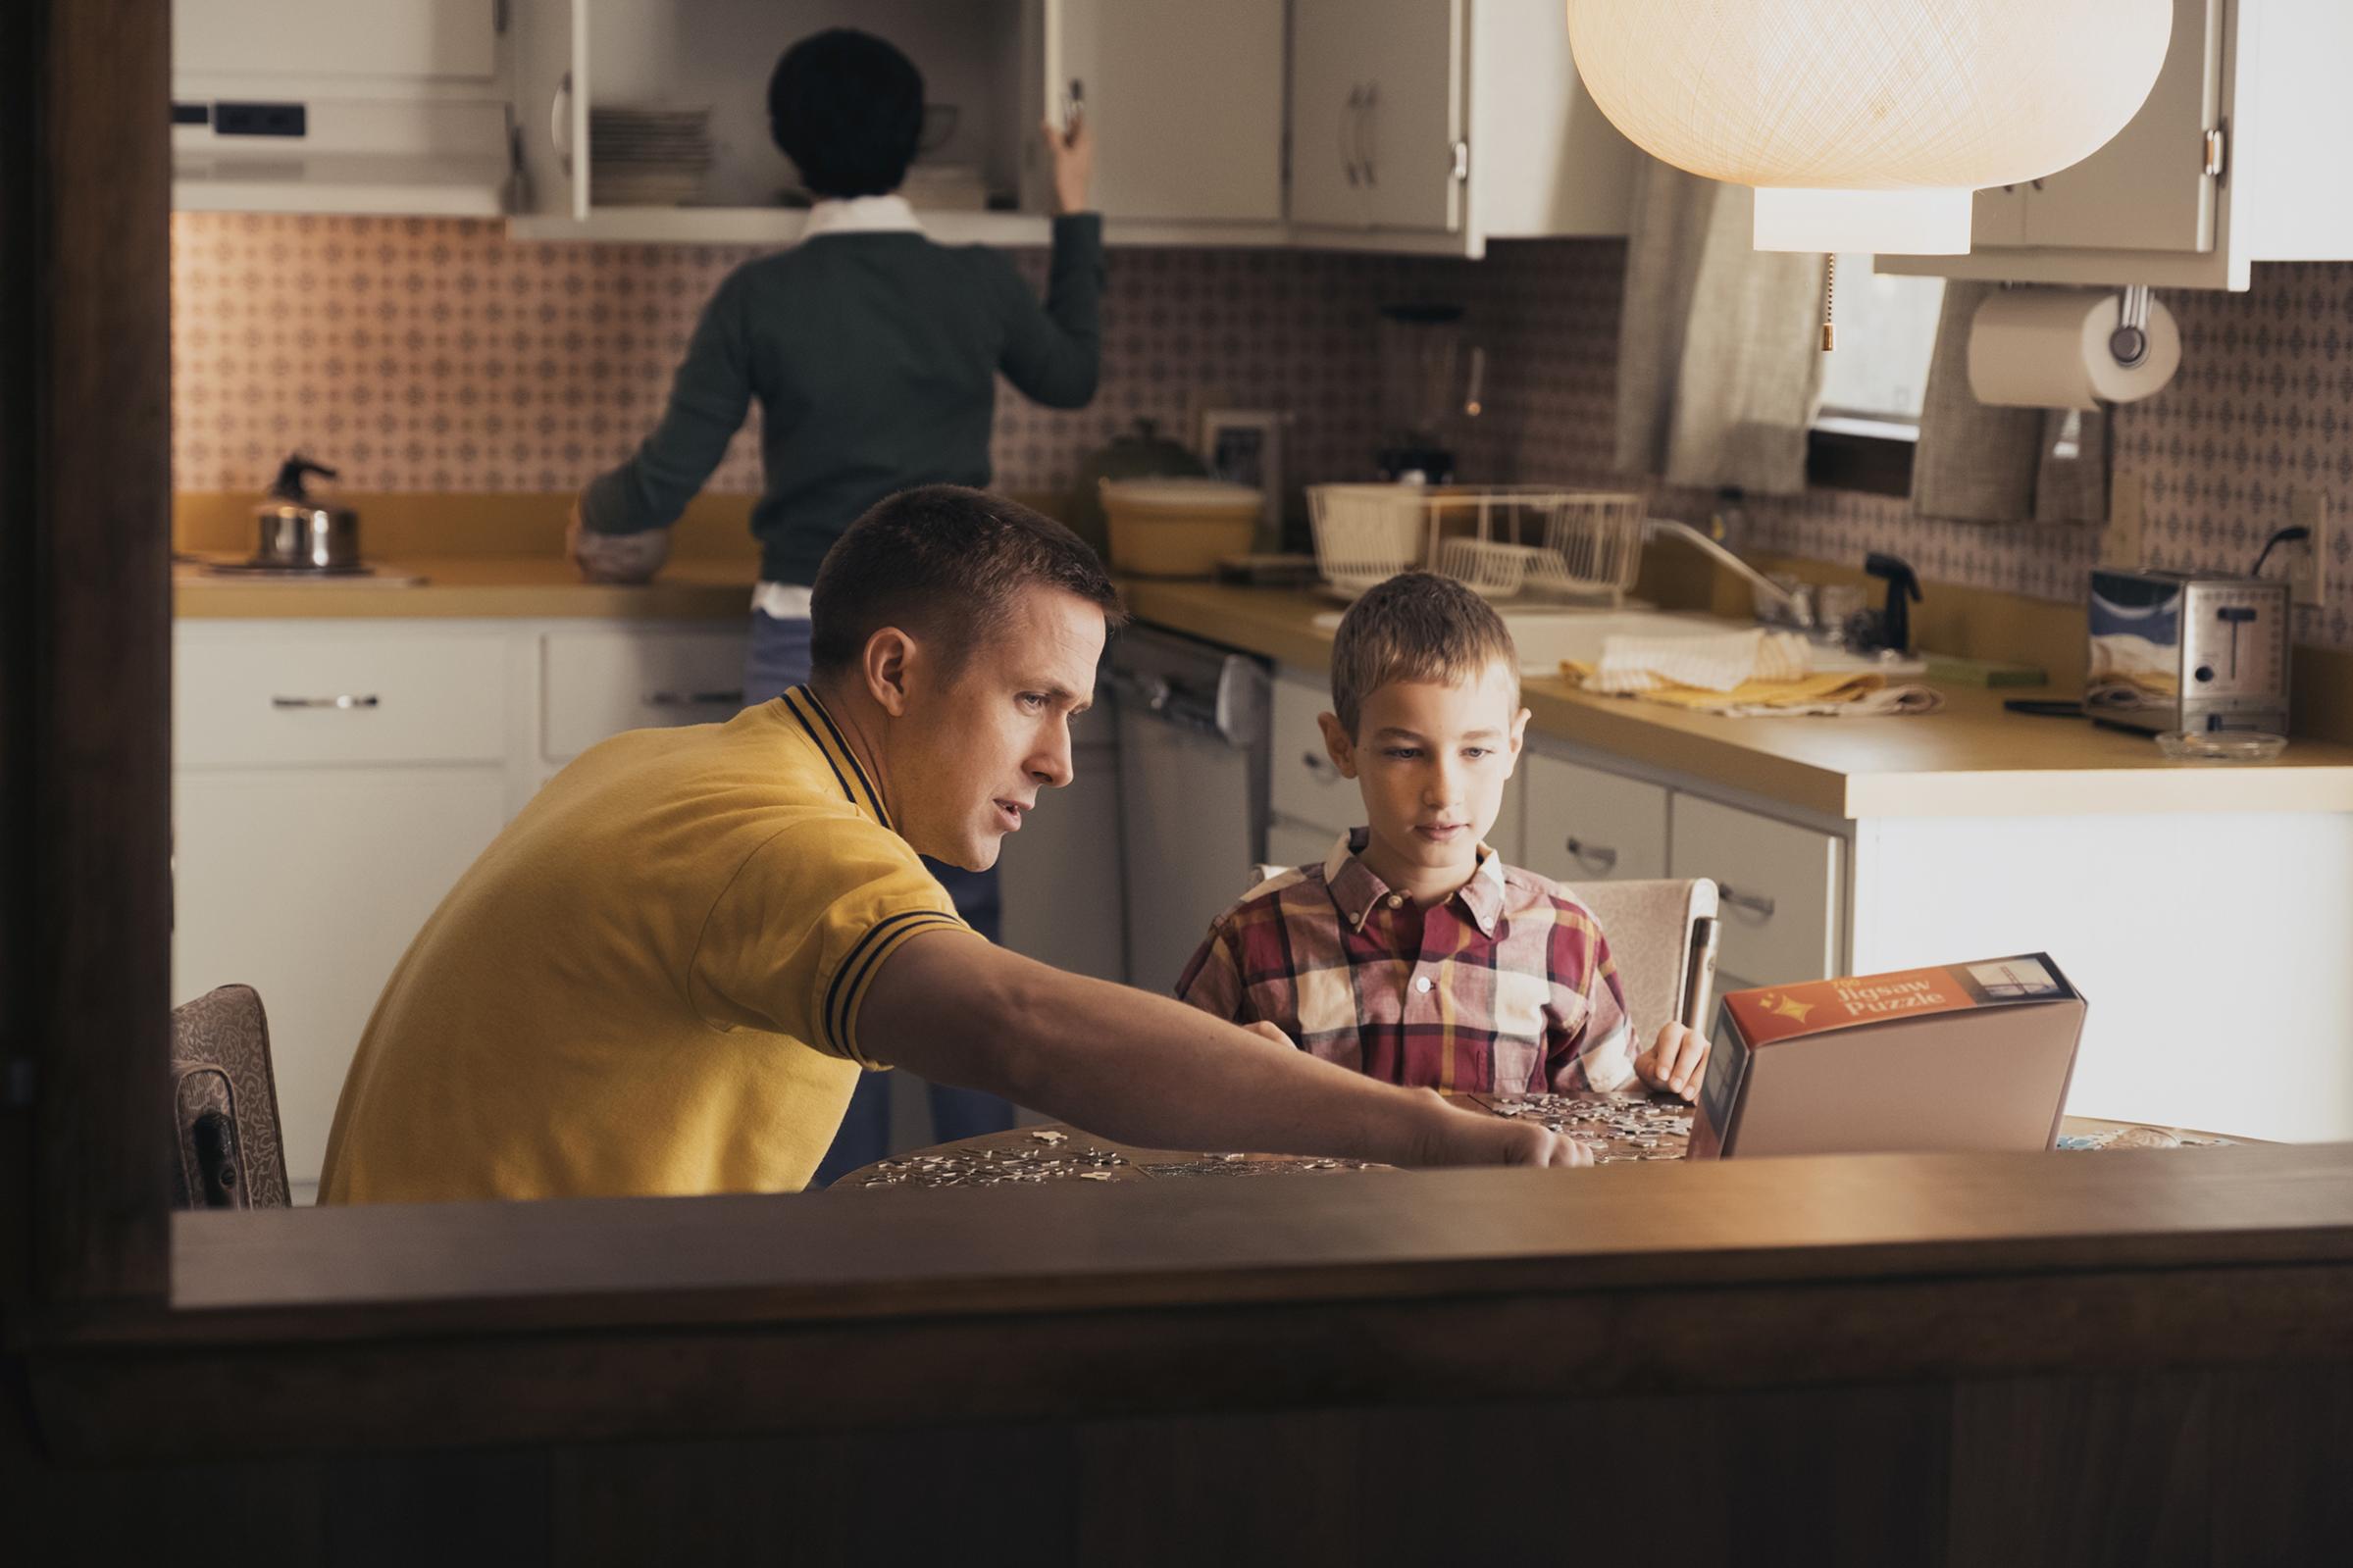 The moon and the home pulled Apollo astronauts in opposite directions. Armstrong (Gosling), with his wife and son in their Houston kitchen, suffered that more than most